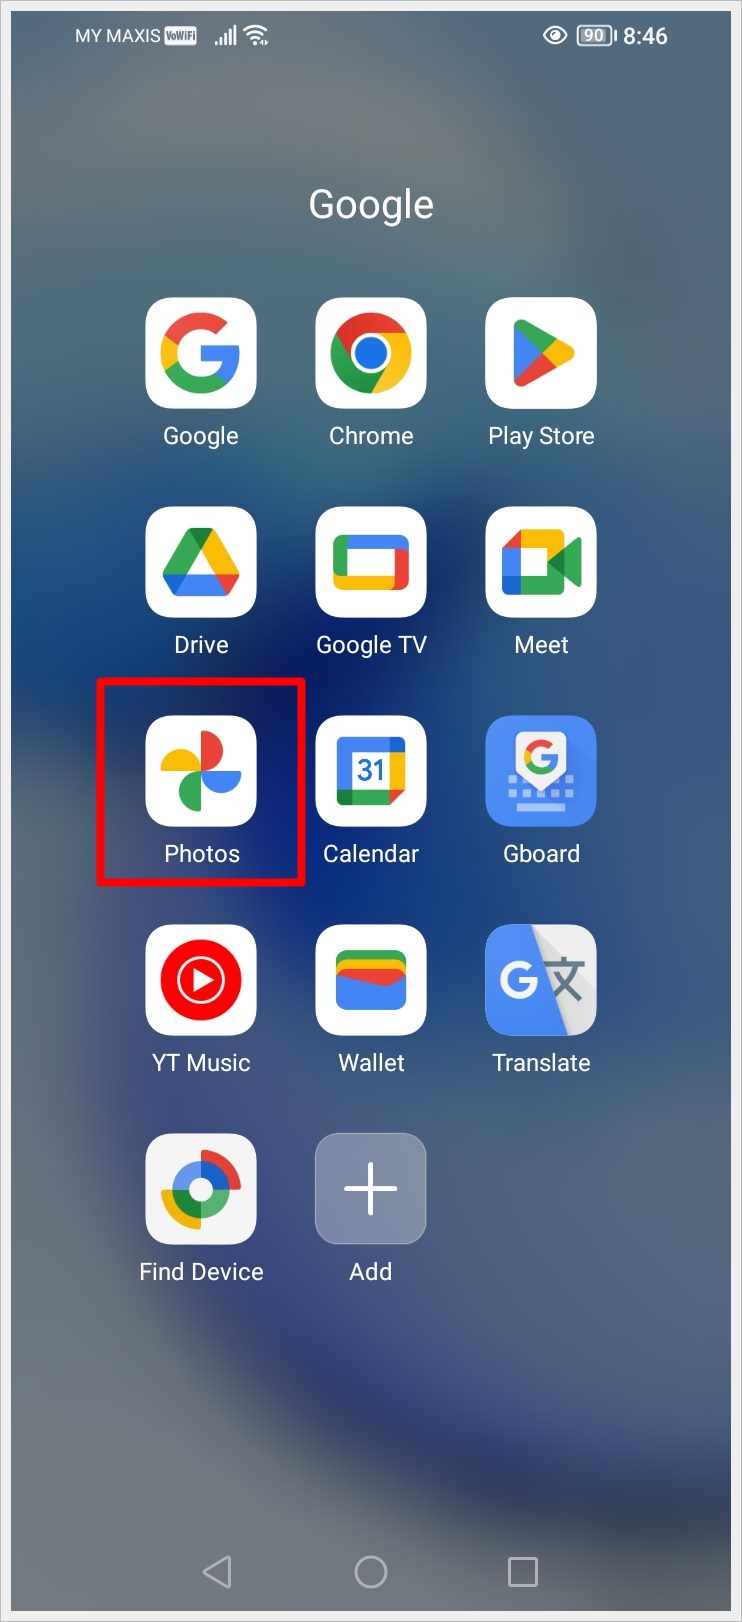 This image shows a screenshot of an Android phone with the 'Google Photos' app icon highlighted.